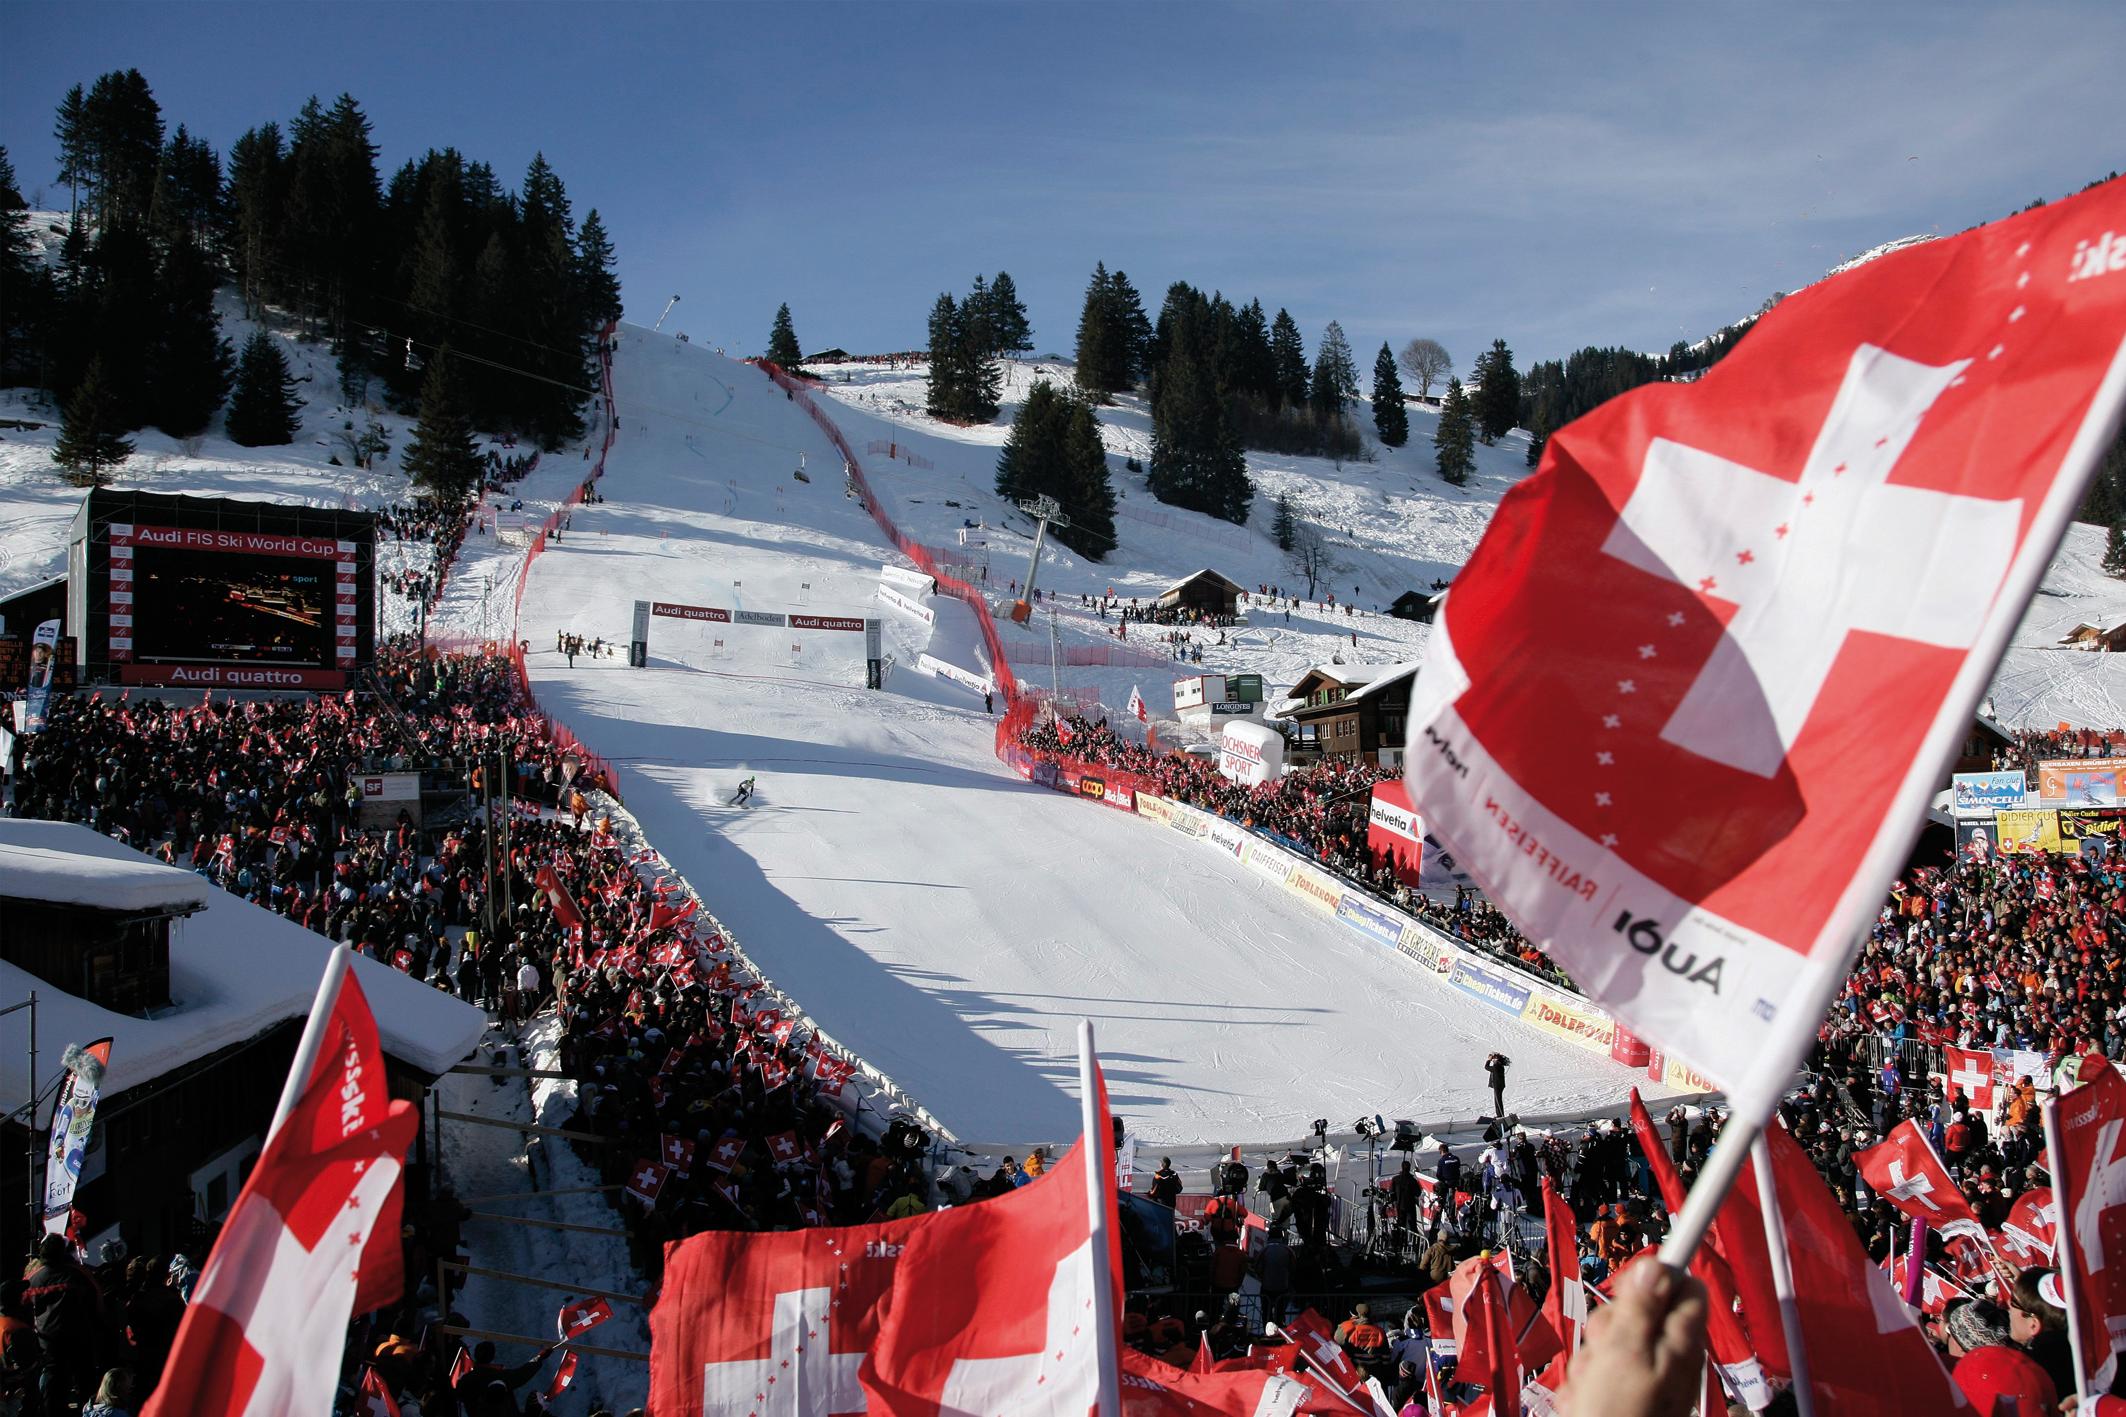 View from the crowd at the Adelboden Ski World Cup